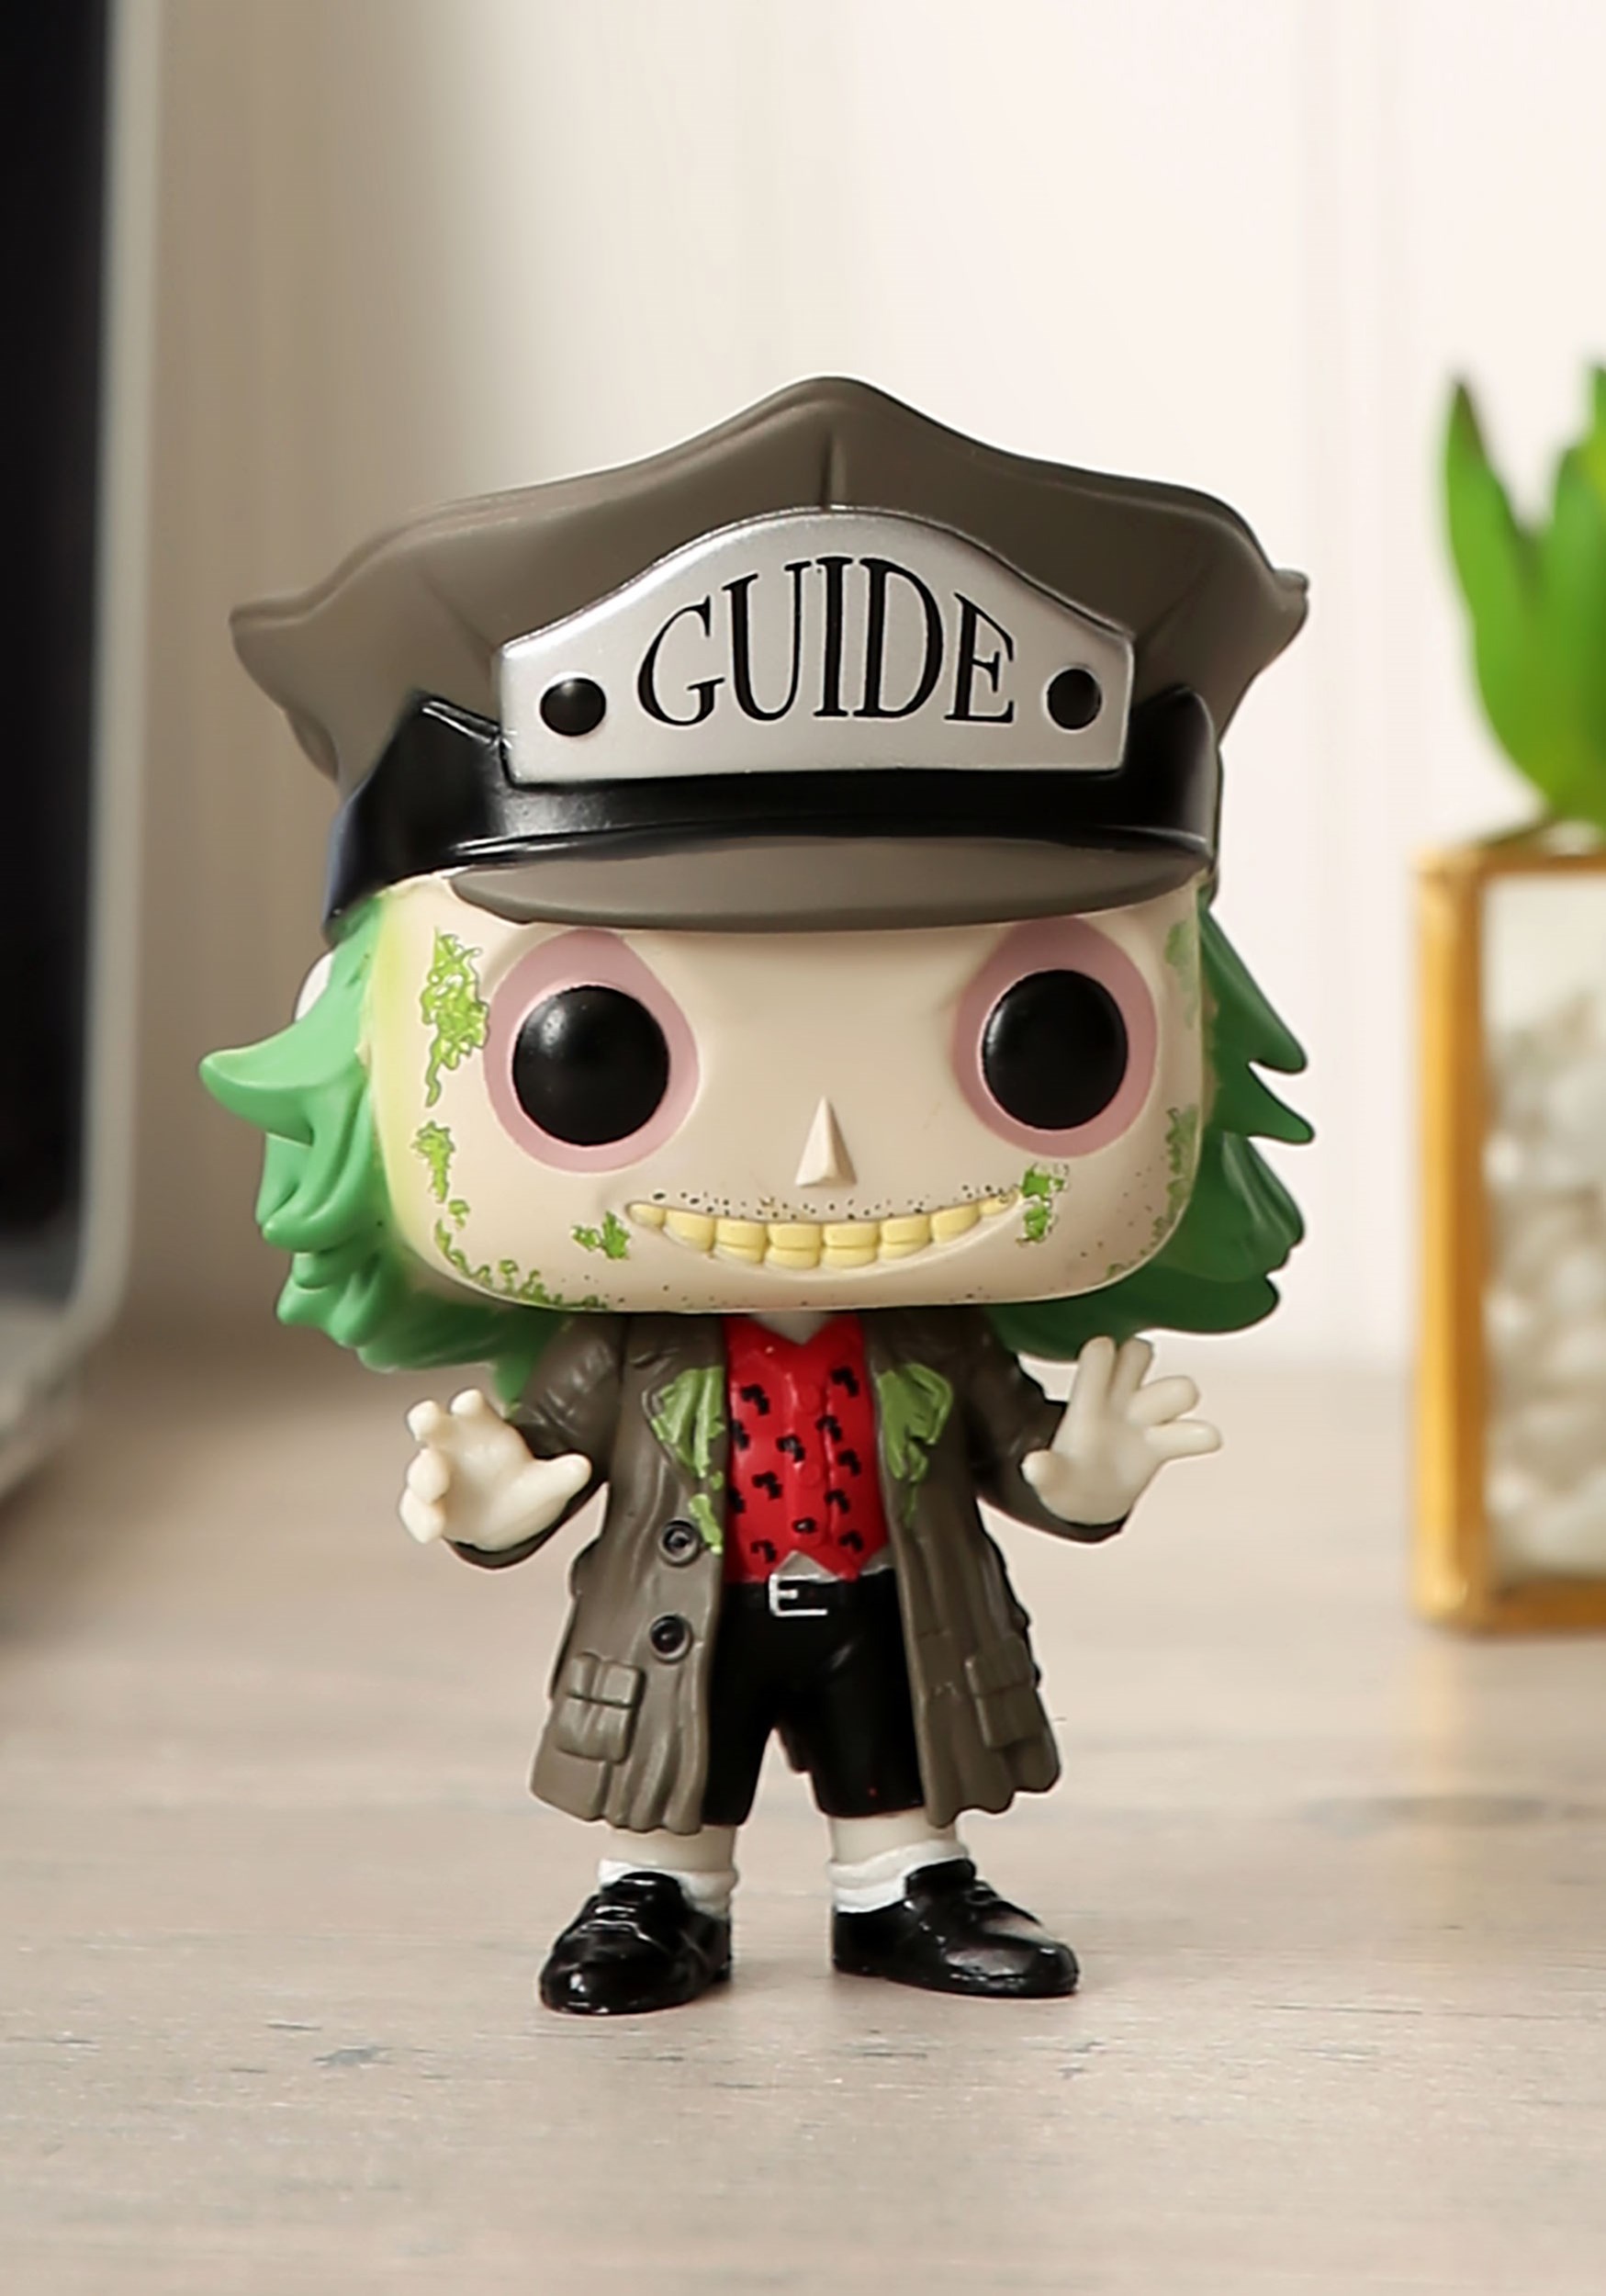 https://images.fun.com/products/54006/1-1/pop-horror-beetlejuice-w-hat-main-upd.jpg